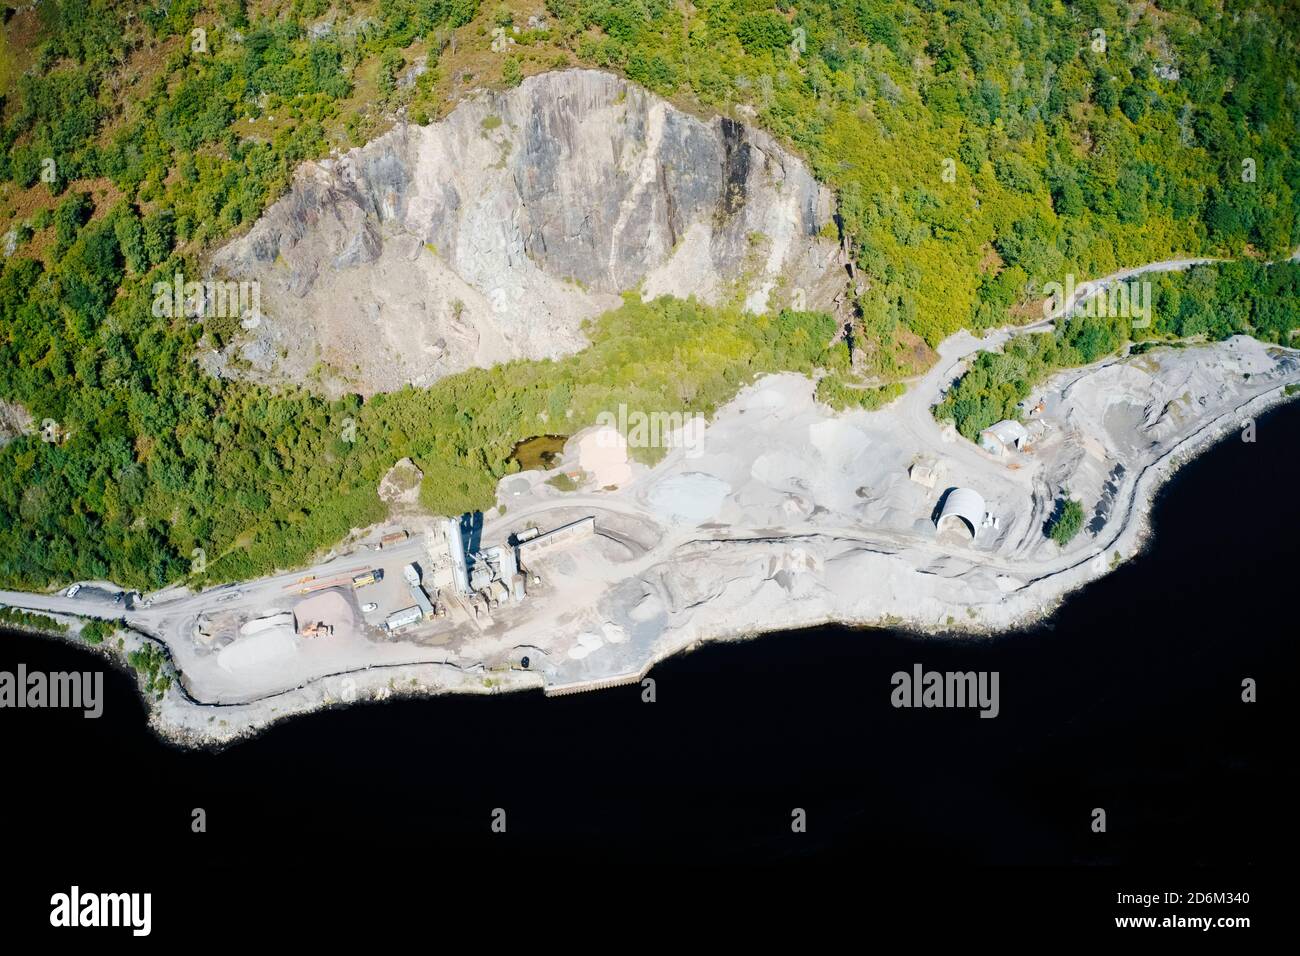 Quarry works industrial digging aerial view from above showing sand mound and hills Stock Photo